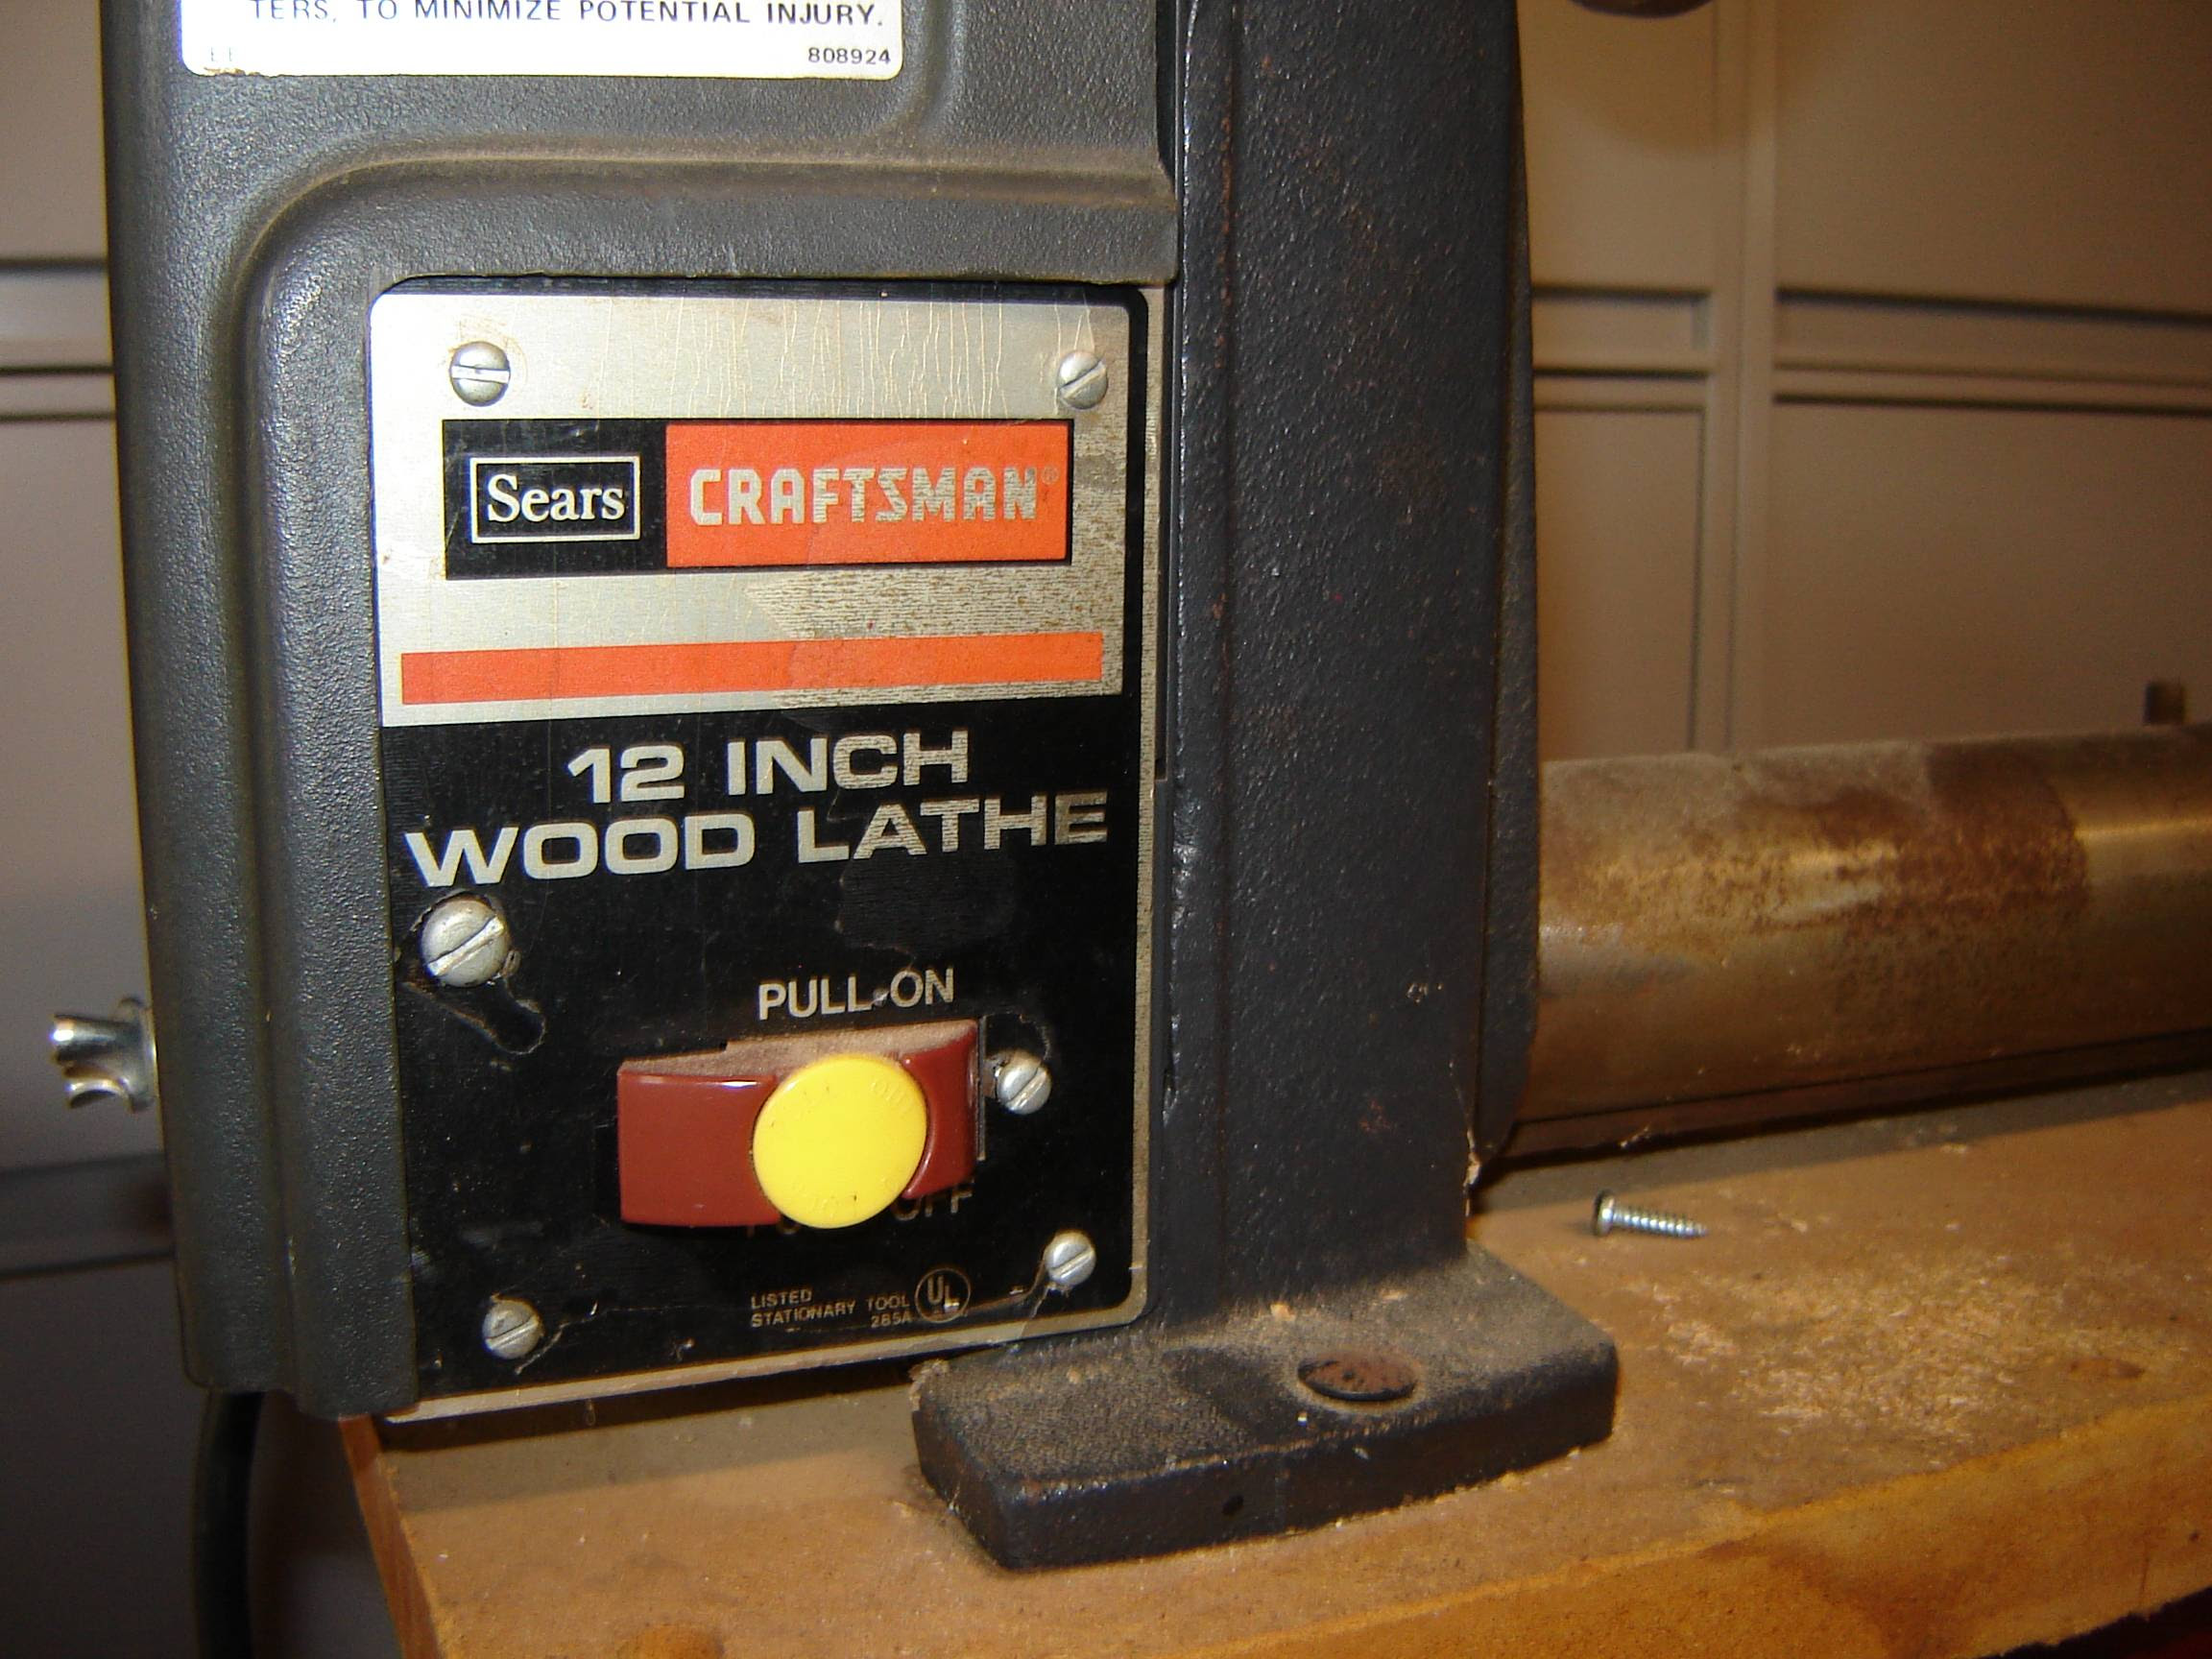 Wood lathe price change  non-hunting CLASSIFIEDS  Texas 